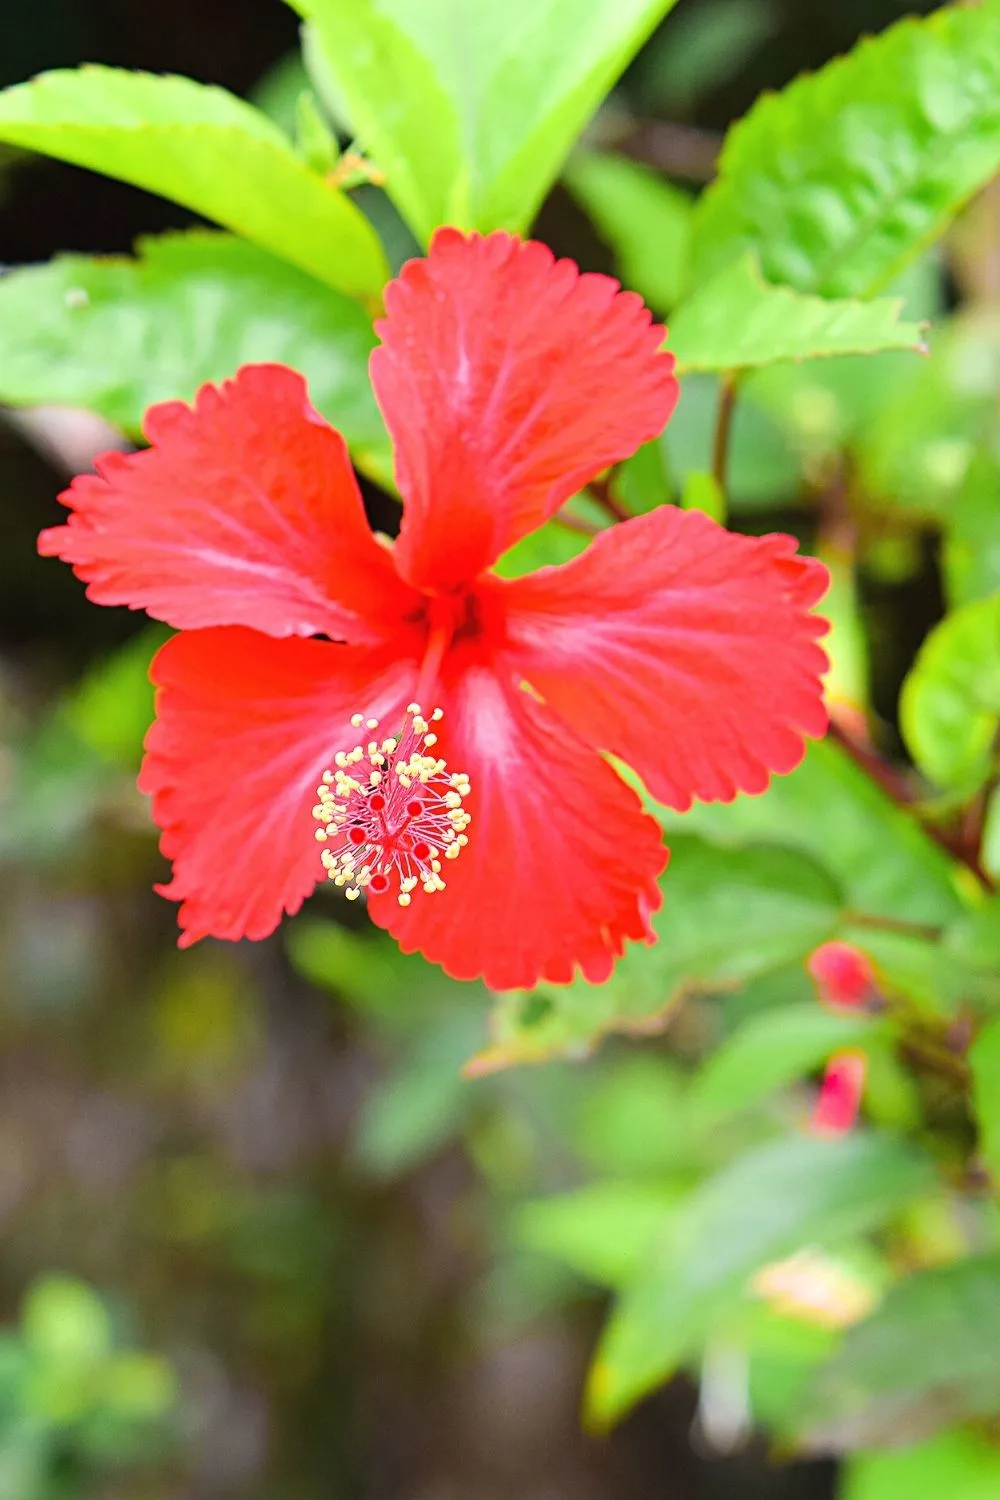 Just like the Bird of Paradise, Hibiscus (Hibiscus rosa-Sinensis) needs bright light for it to bloom